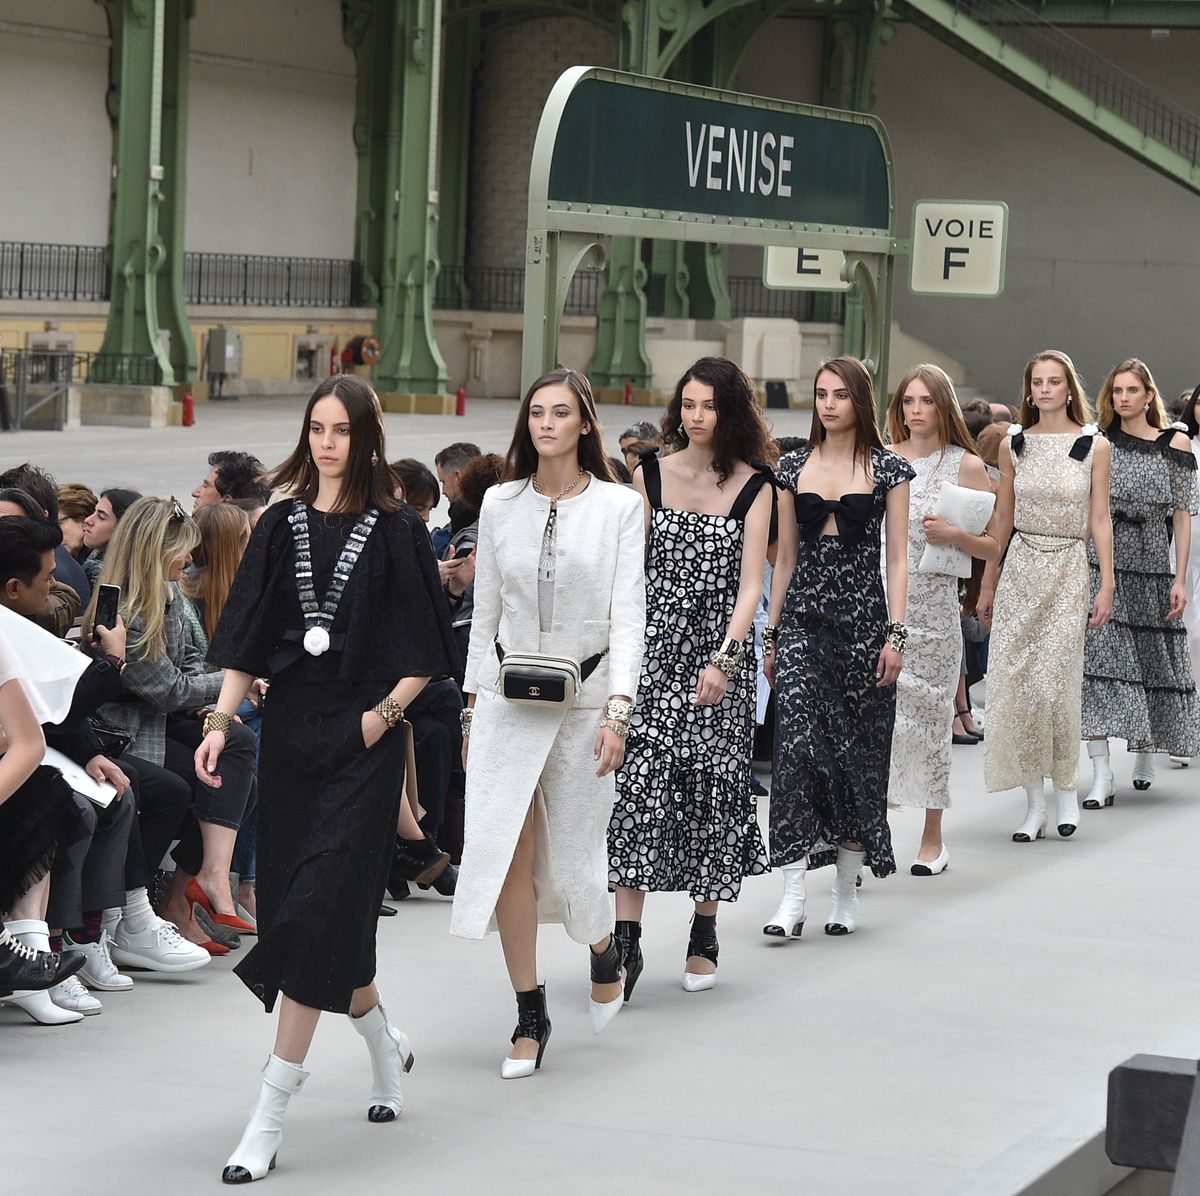 CHANEL CRUISE 2019/2020 COLLECTION - Time International